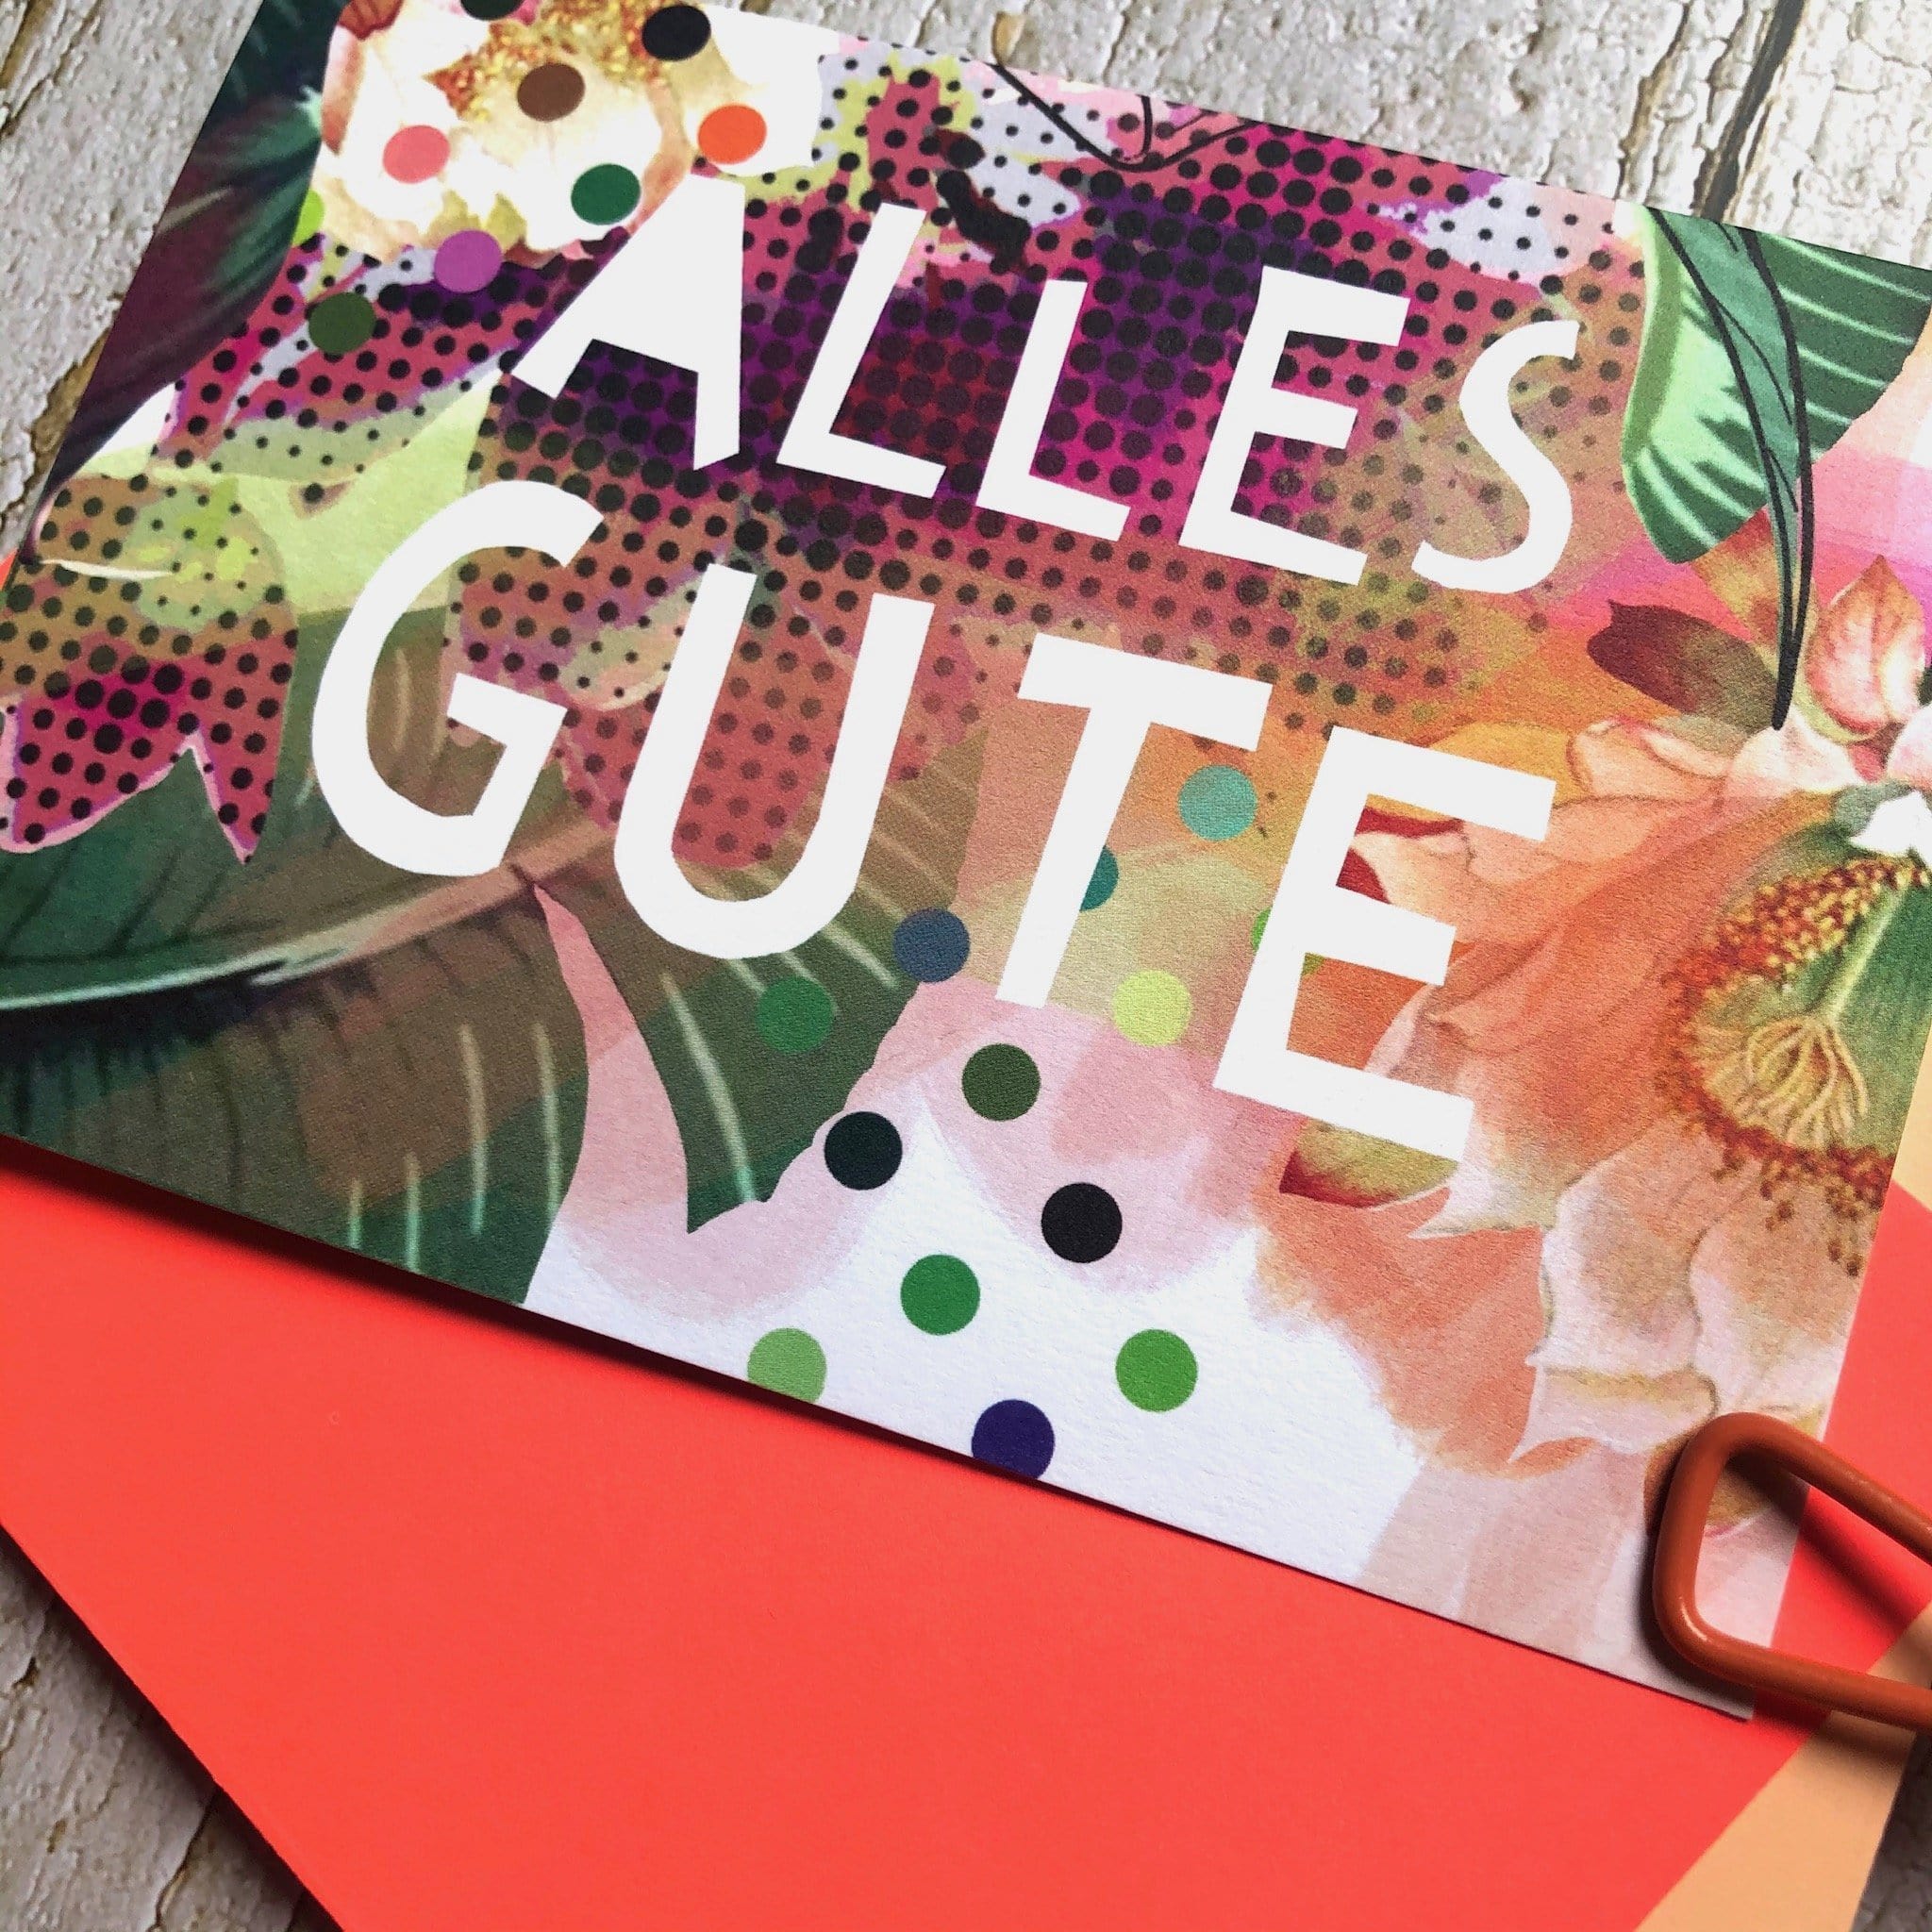 Alles Gute Greeting Card Motley Blooms Greeting Cards Card